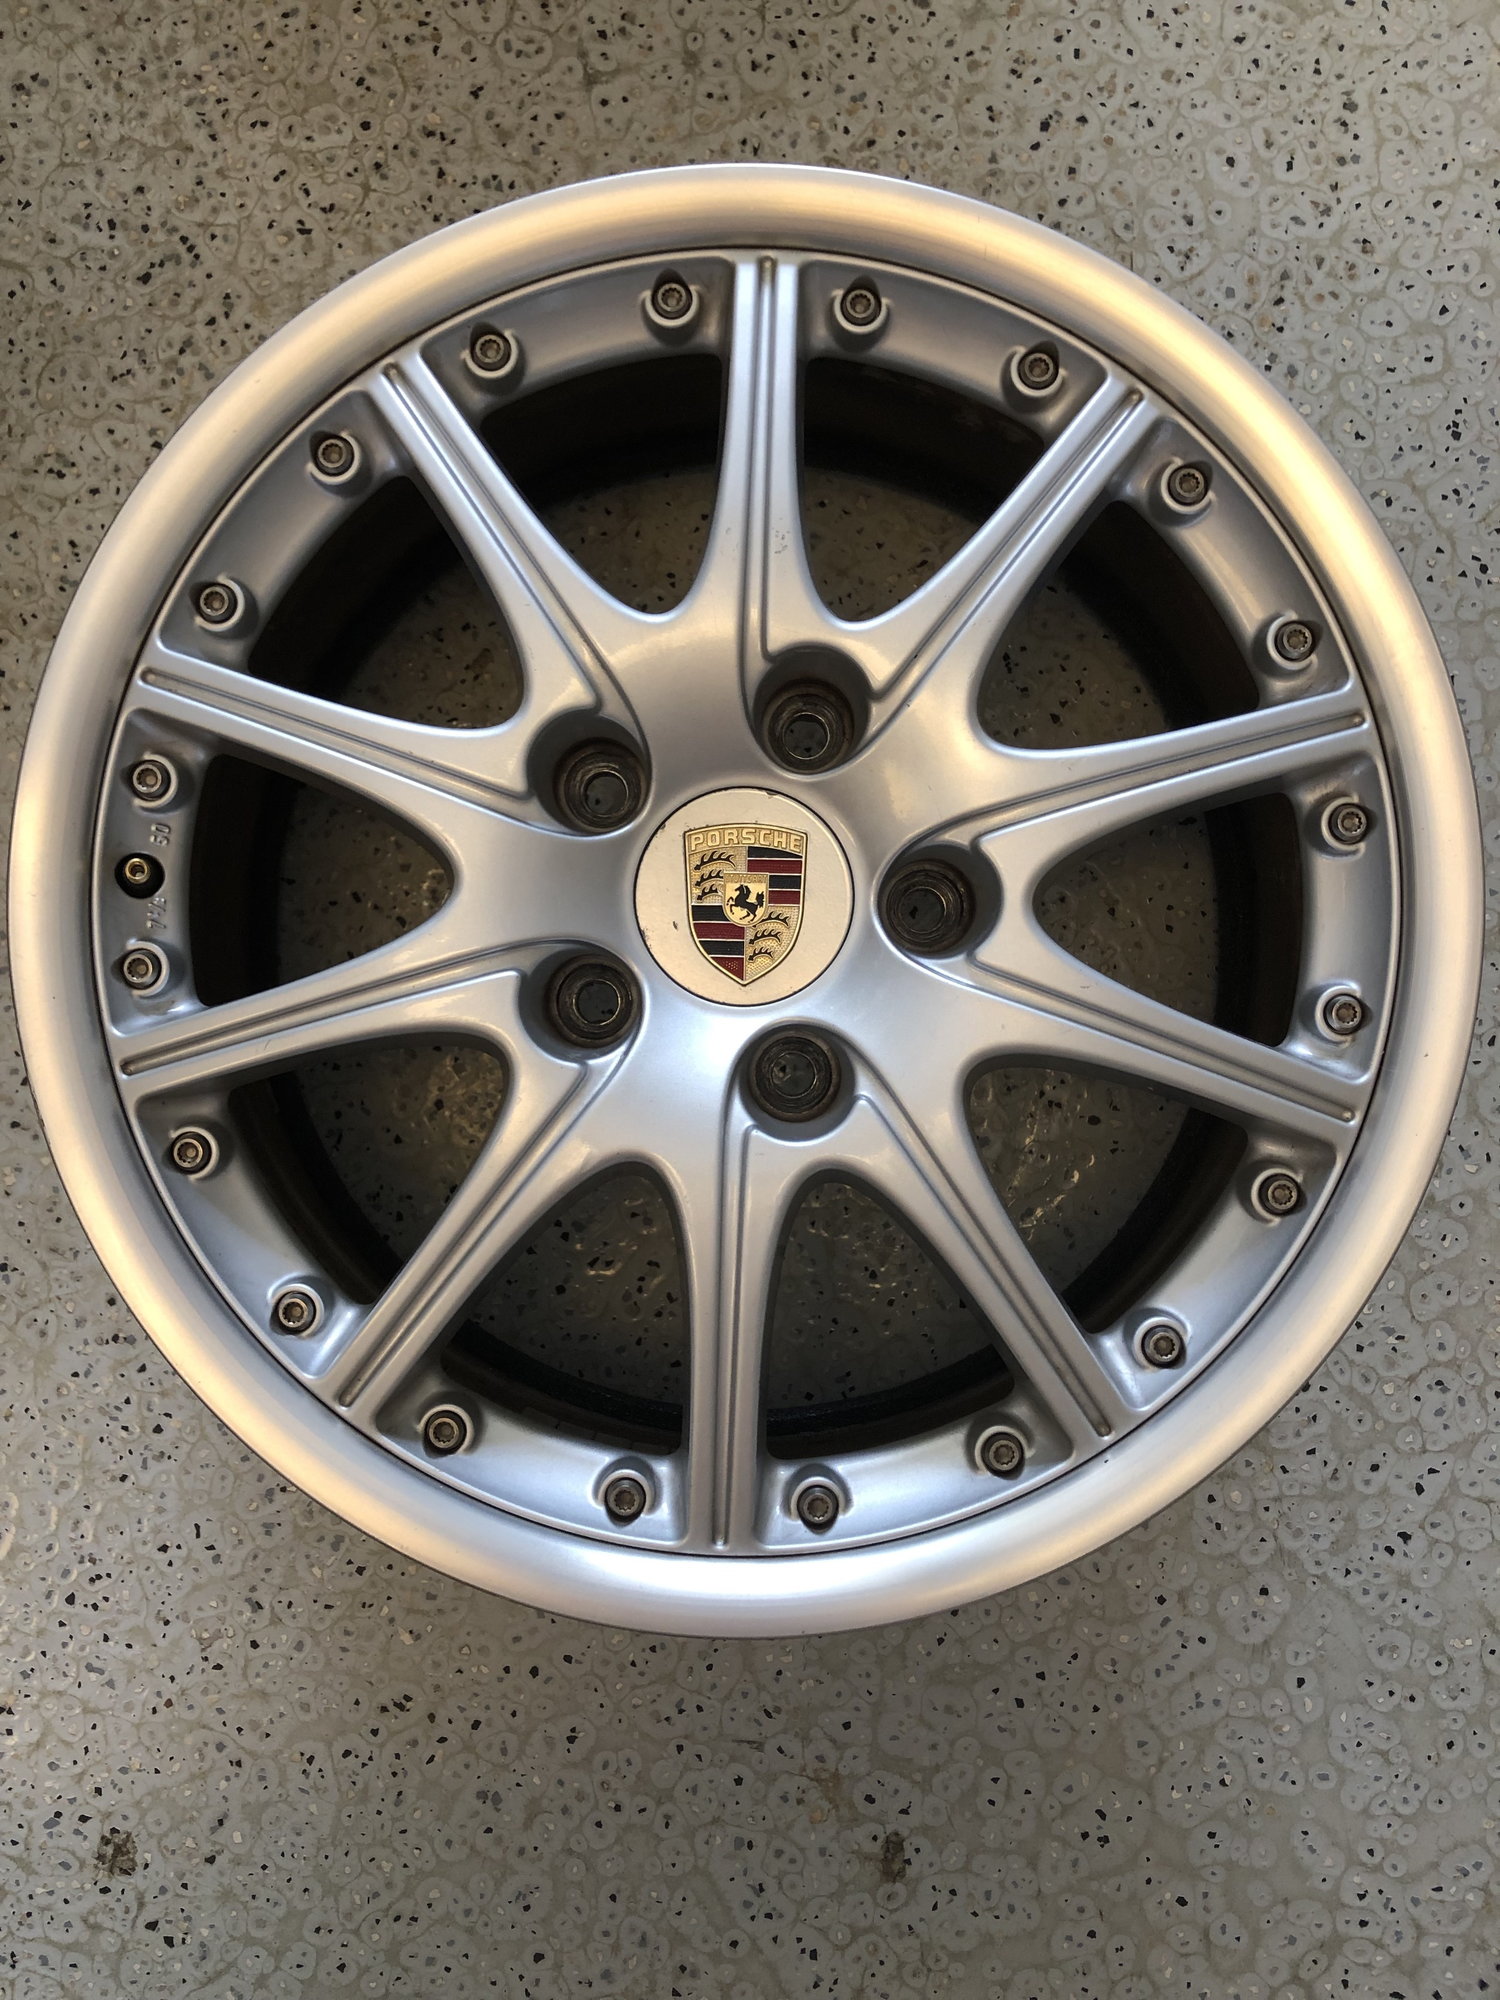 Wheels and Tires/Axles - Porsche BBS Sport Design 18" wheels for 996, 993, Boxster - Used - 1995 to 2003 Porsche 911 - Orlando, FL 32765, United States